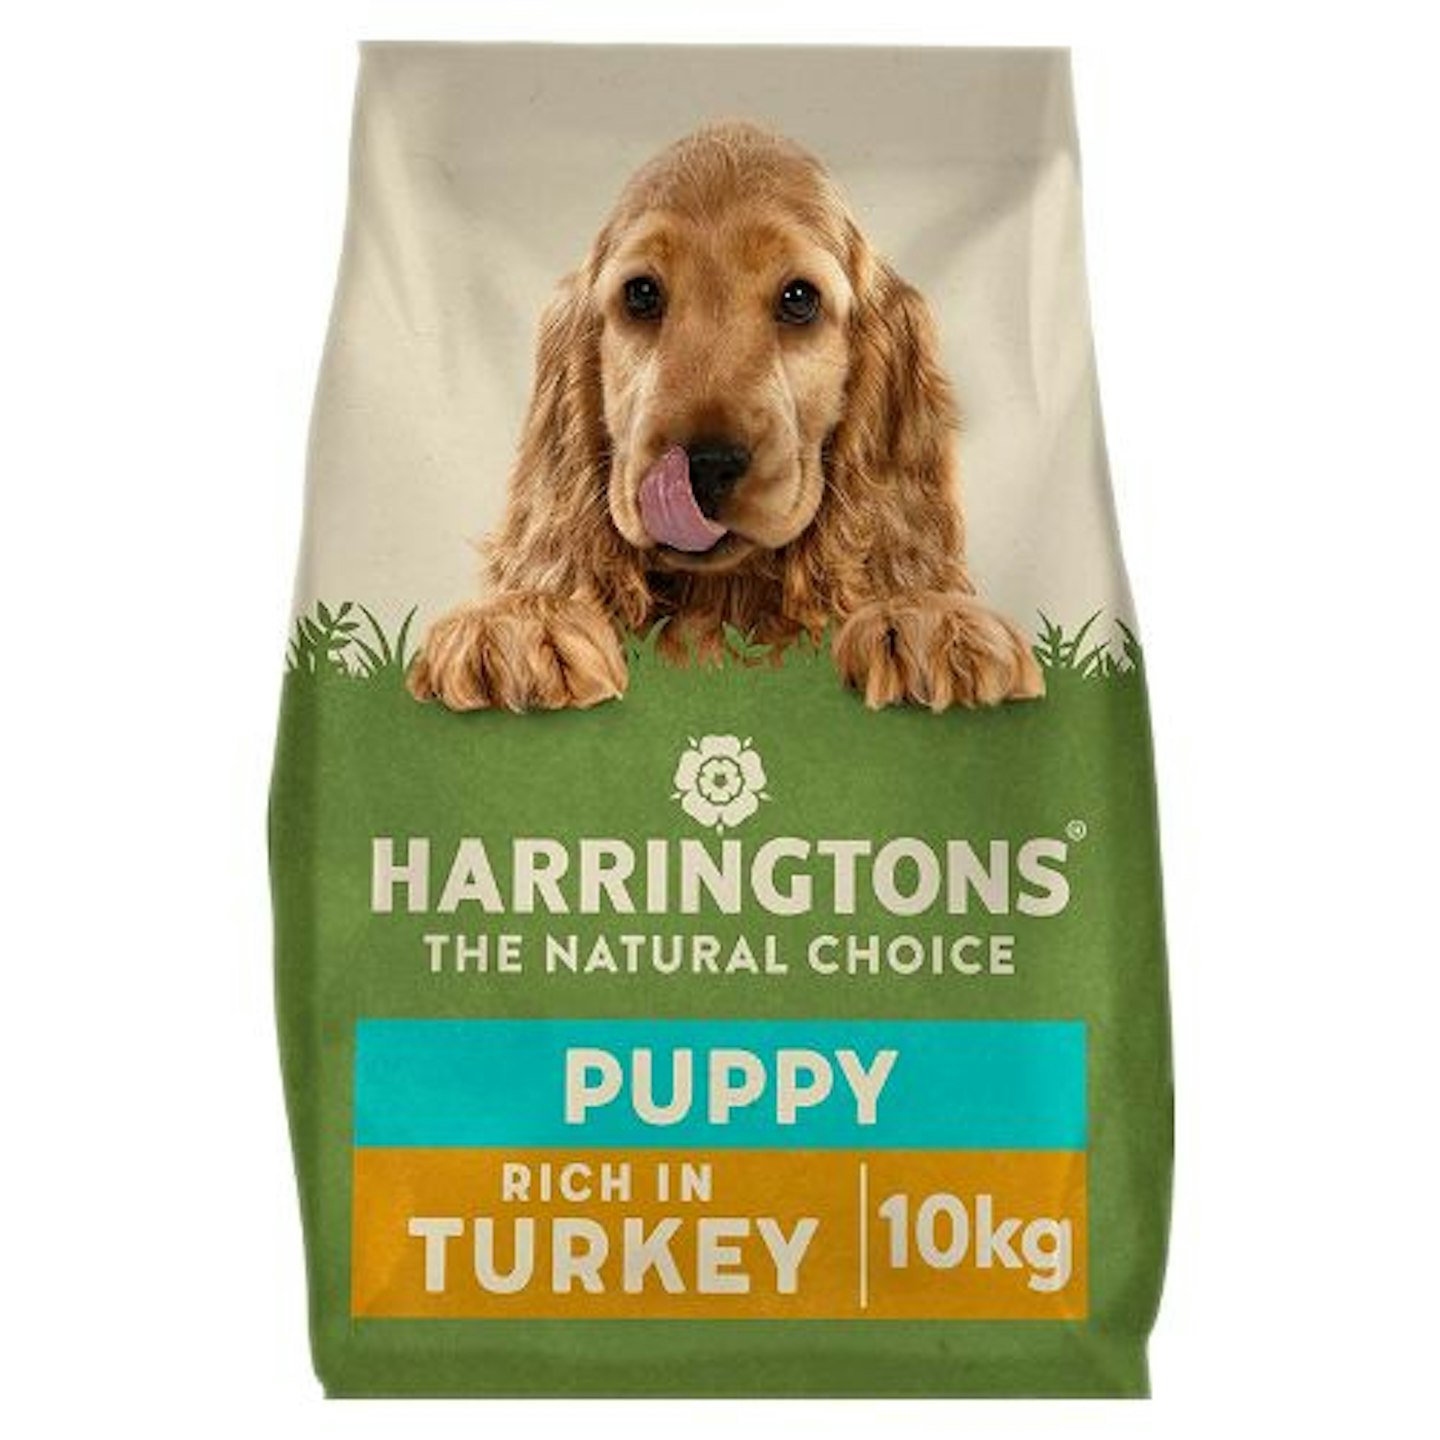 Harringtons, Puppy Food Rich in Turkey and Rice - 10kg